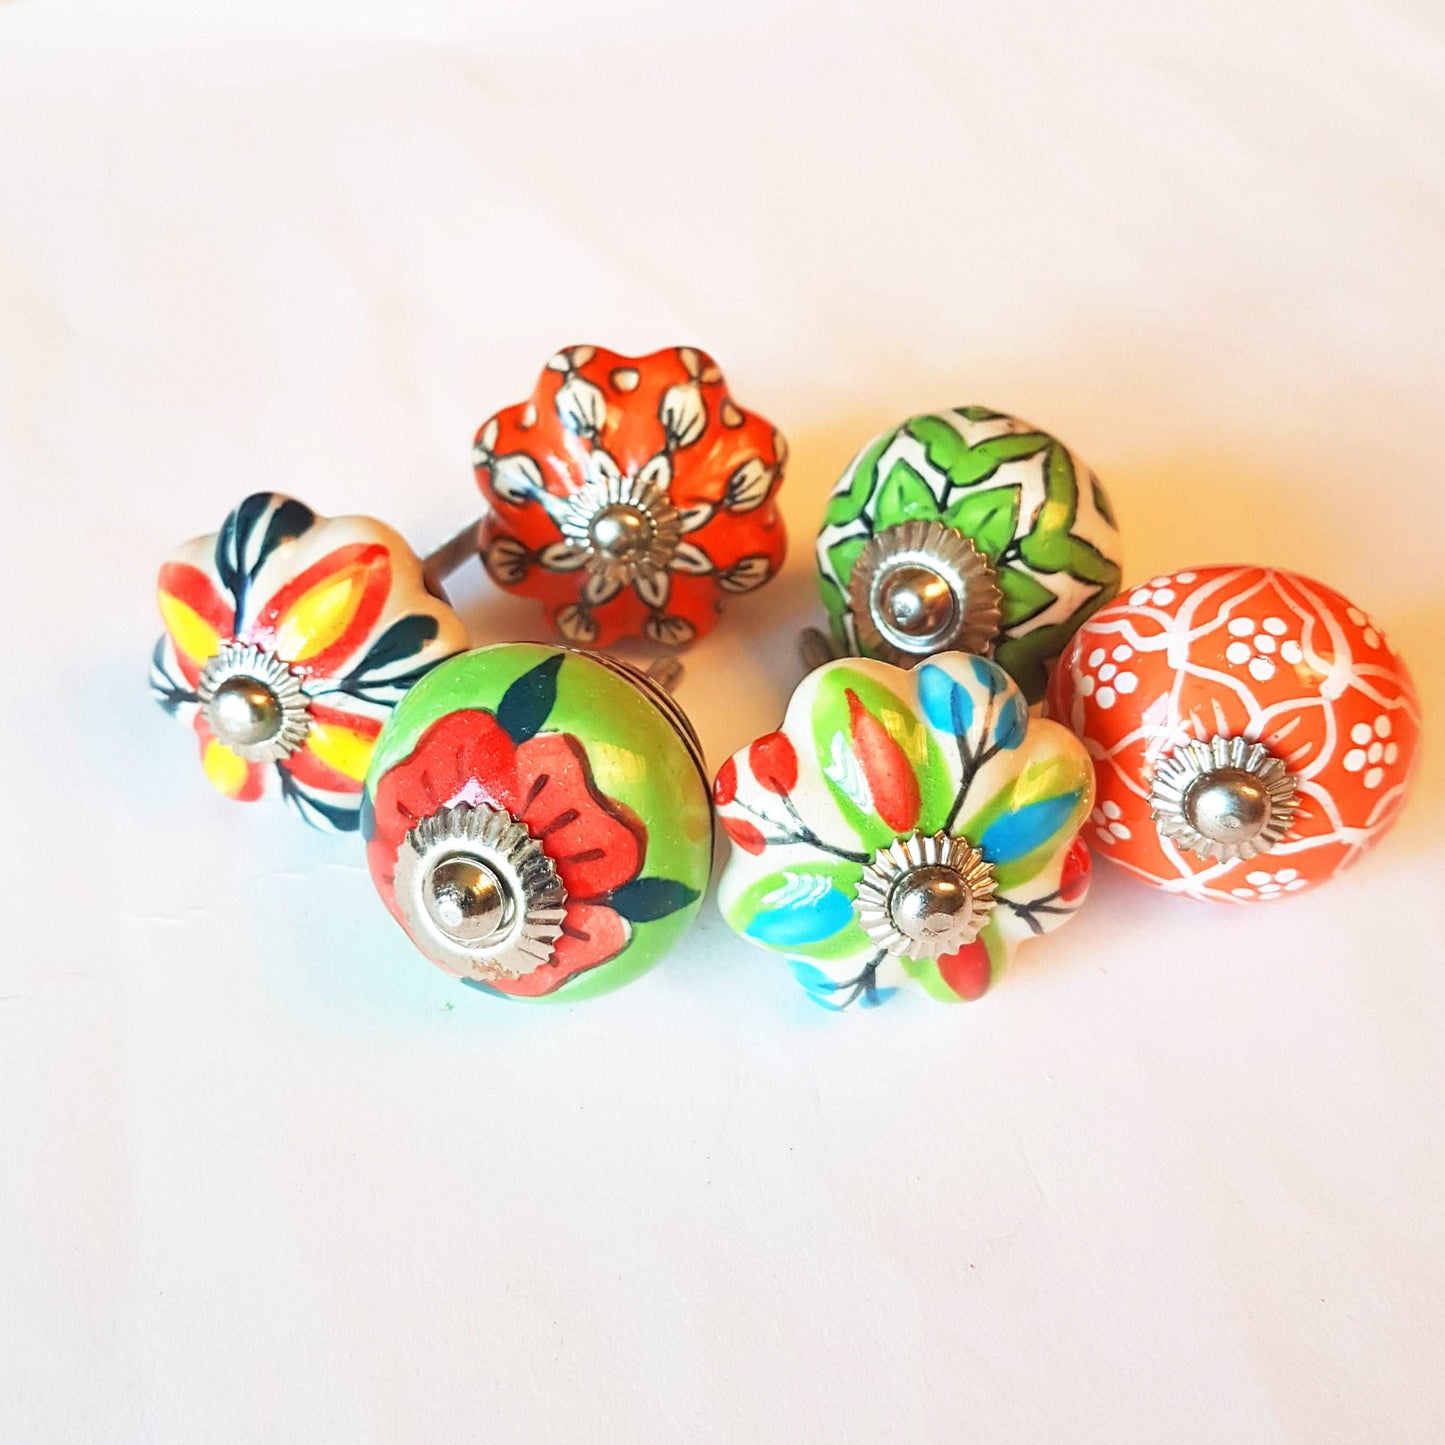 6 cabinet knobs Dolce exclusive collection. Hand painted floral ceramic art. Drawer pulls. one and one half inches in diameter